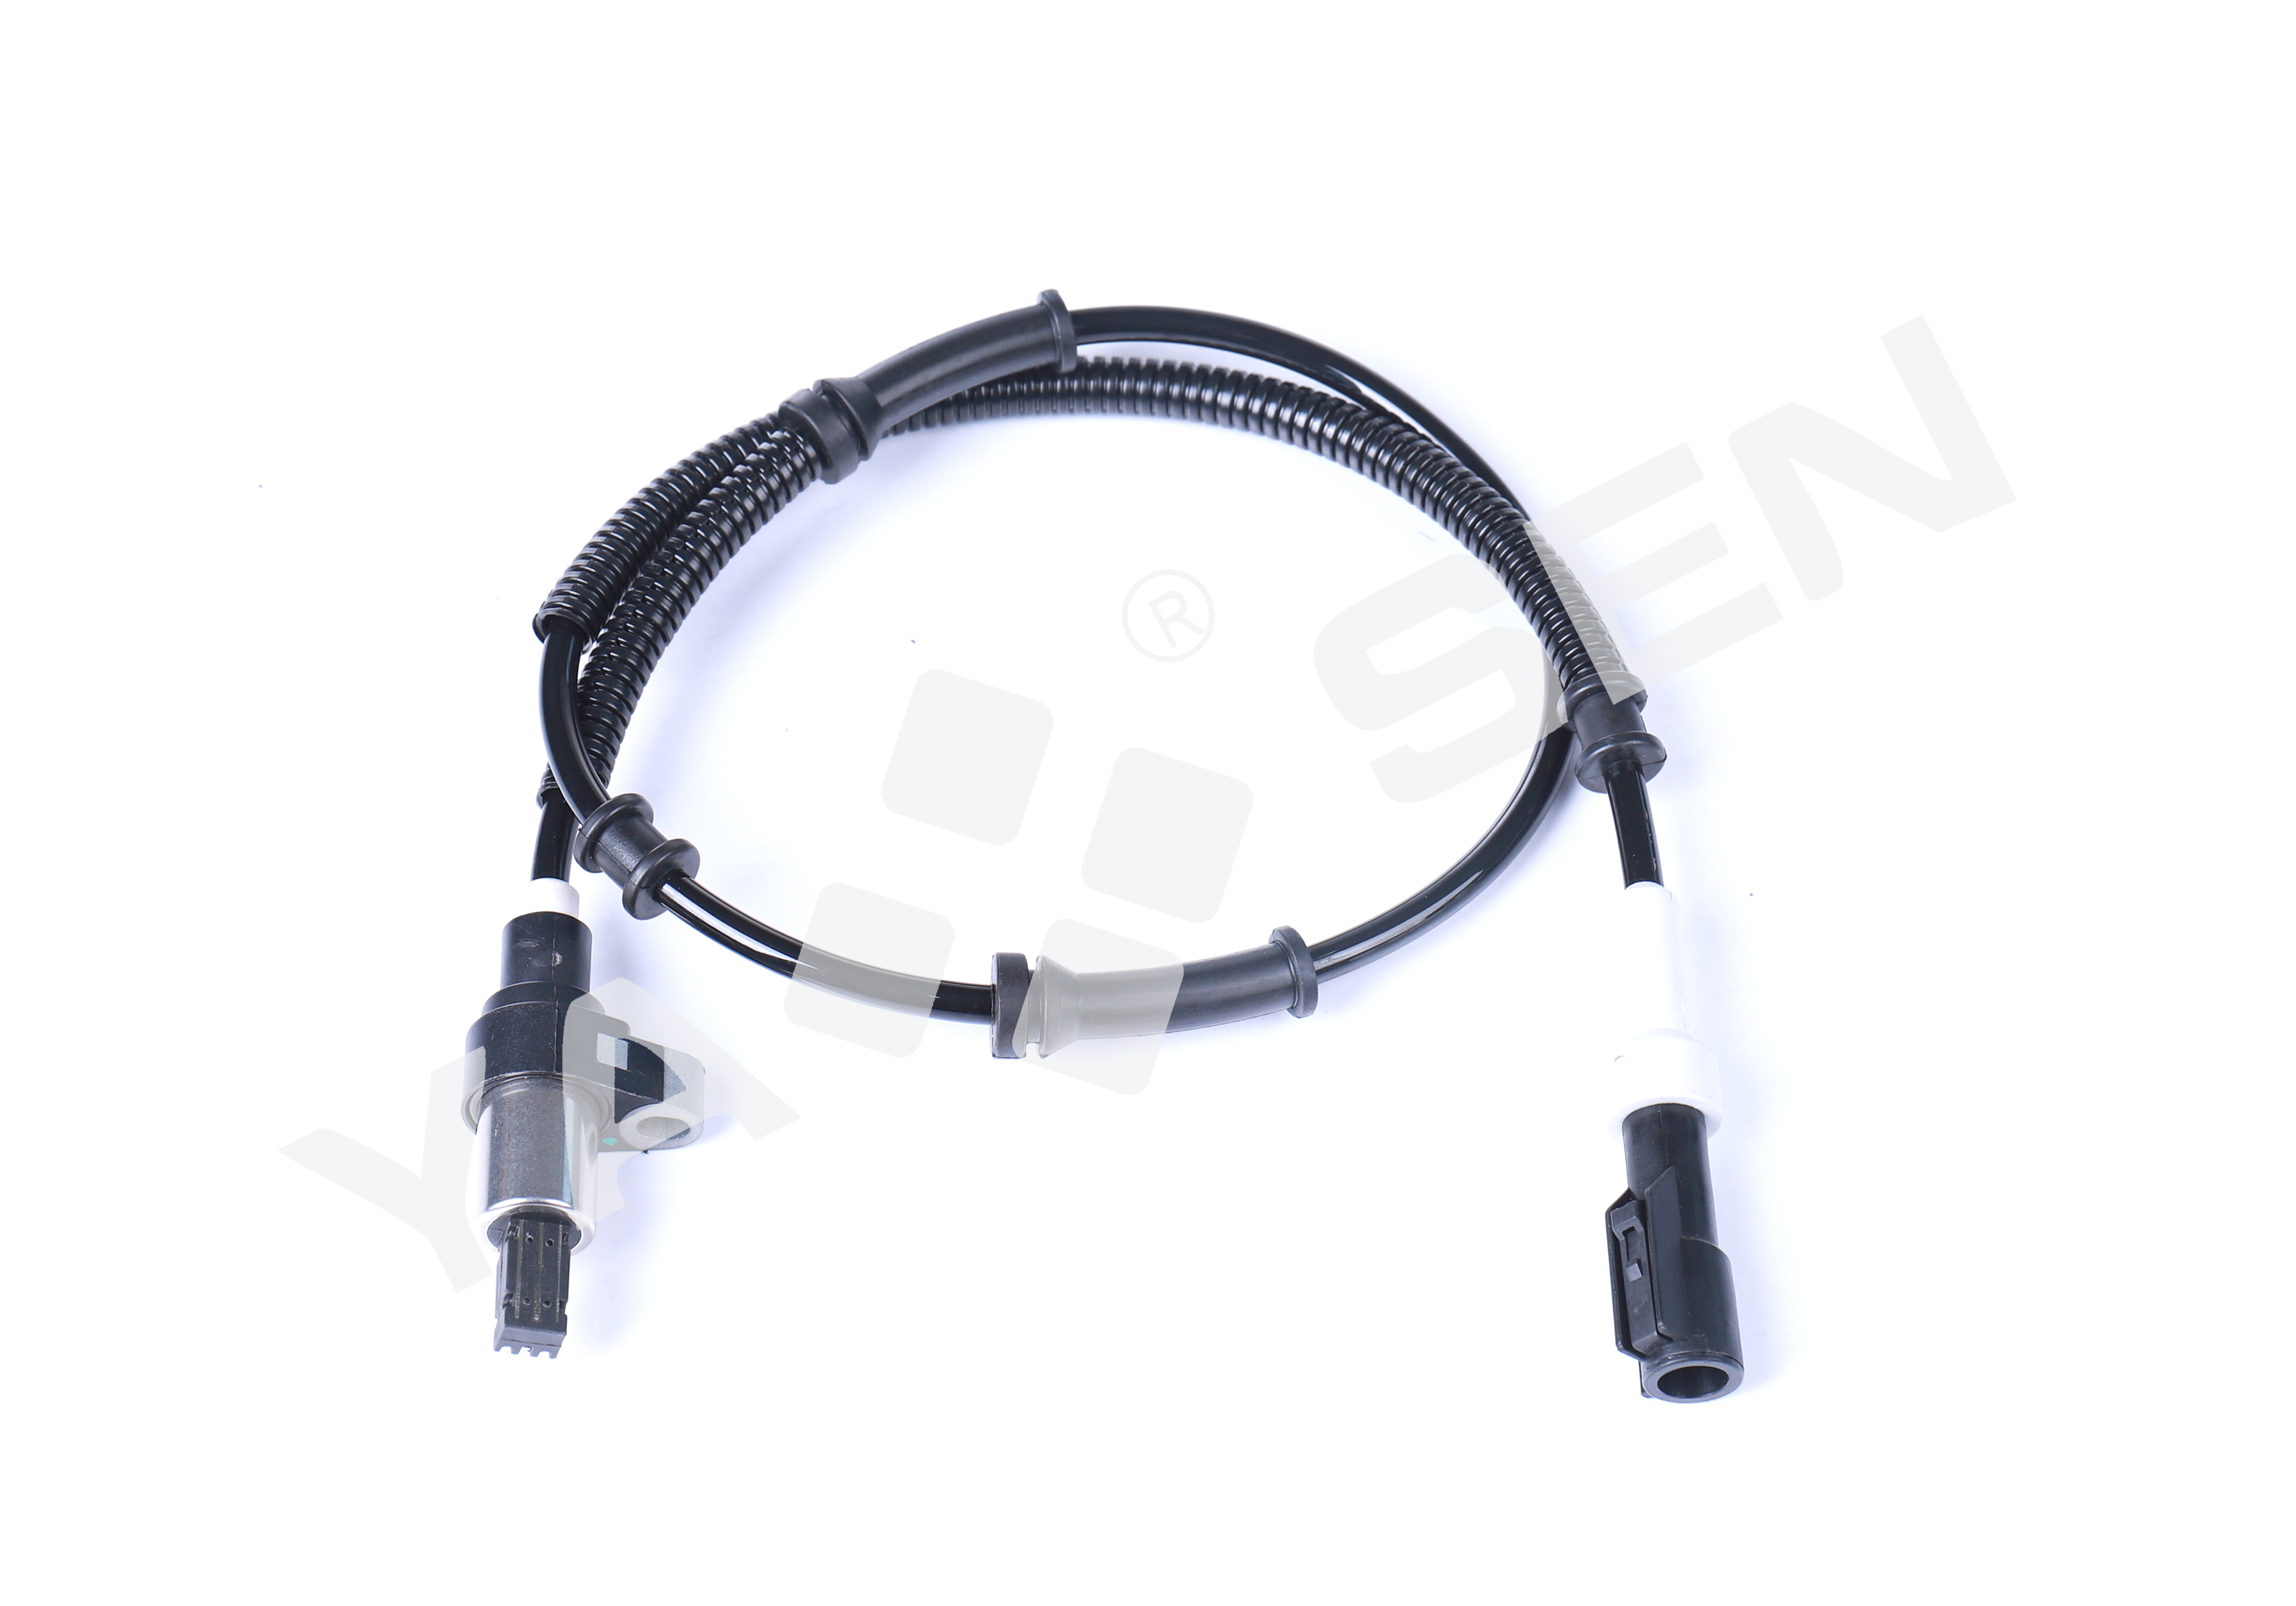 ABS Wheel Speed Sensor for FORD, 19236217 F0VY2C204A F0VY2C204AA F1VY2C190A F1VY2C190AA SU7454 970-019 5S5921 ALS160 BRAB98